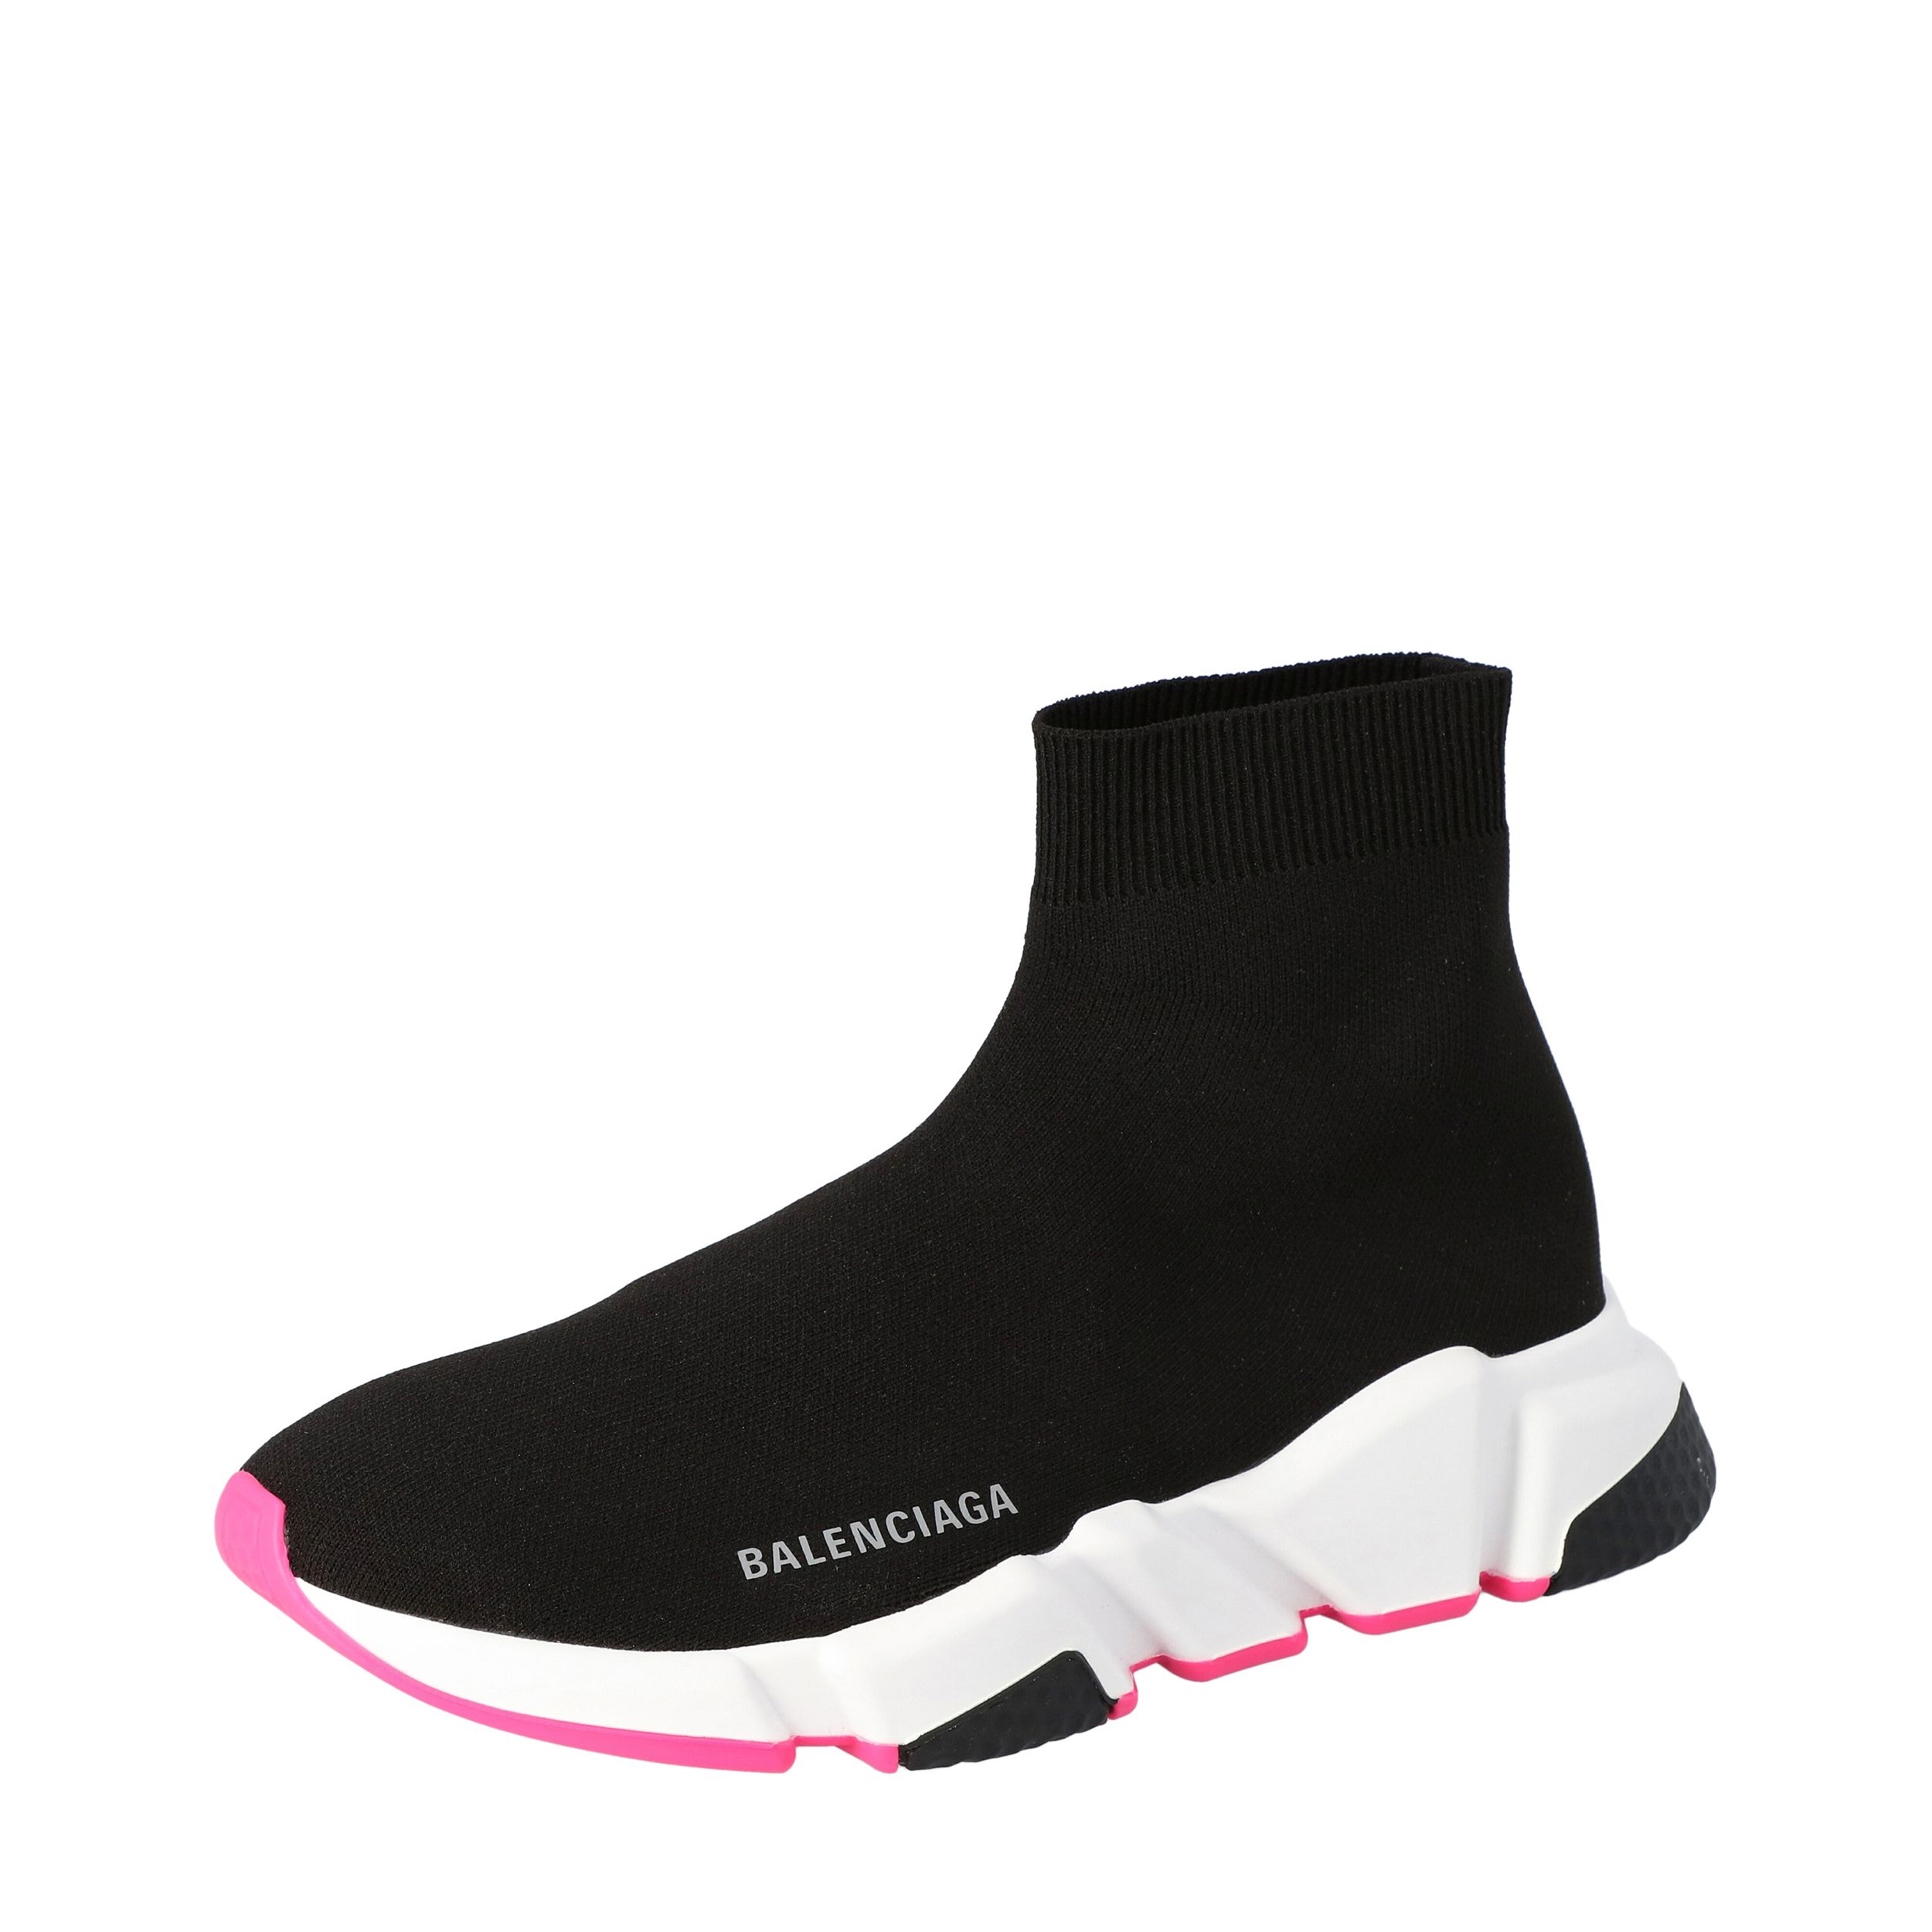 Balenciaga Black/Pink Knit Speed High Top Sneakers Size 38